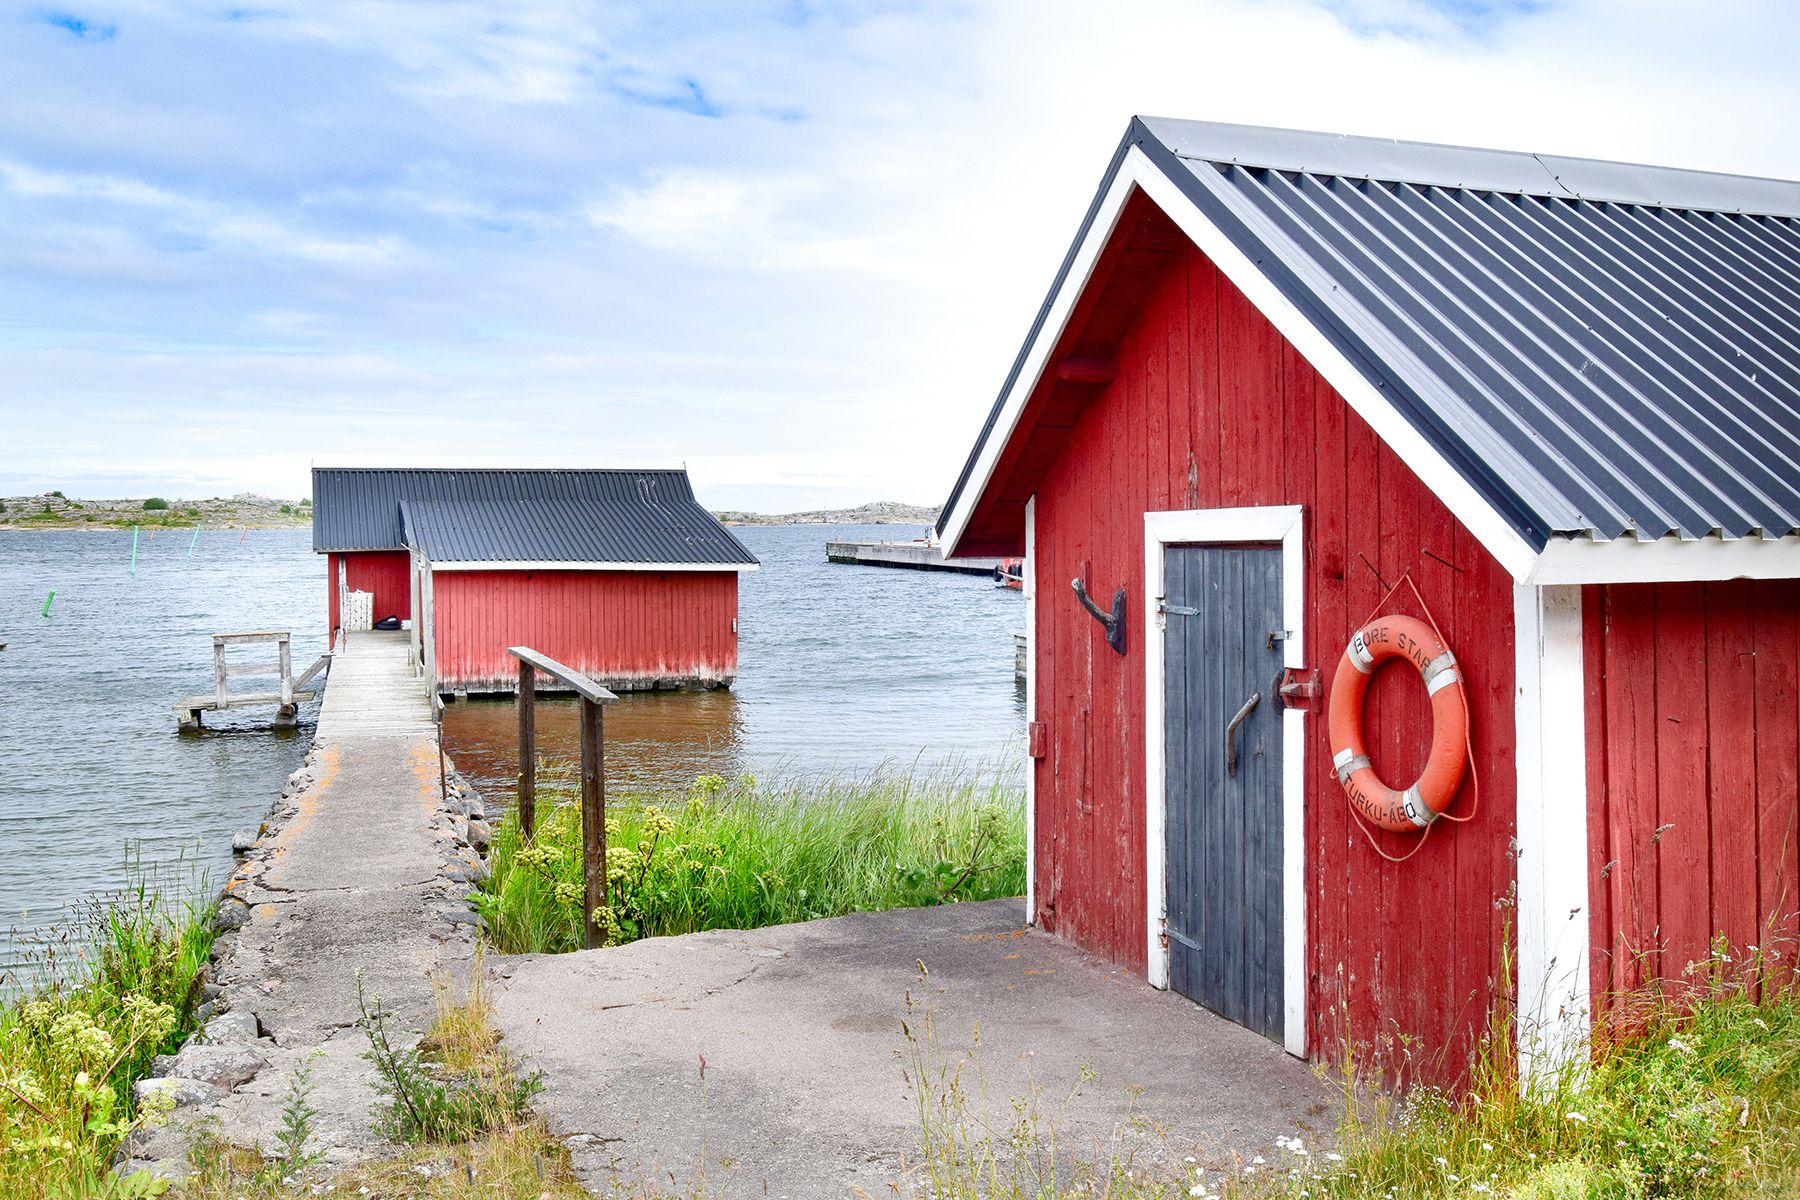 Red wooden buildings beside the sea on the island of Utö.